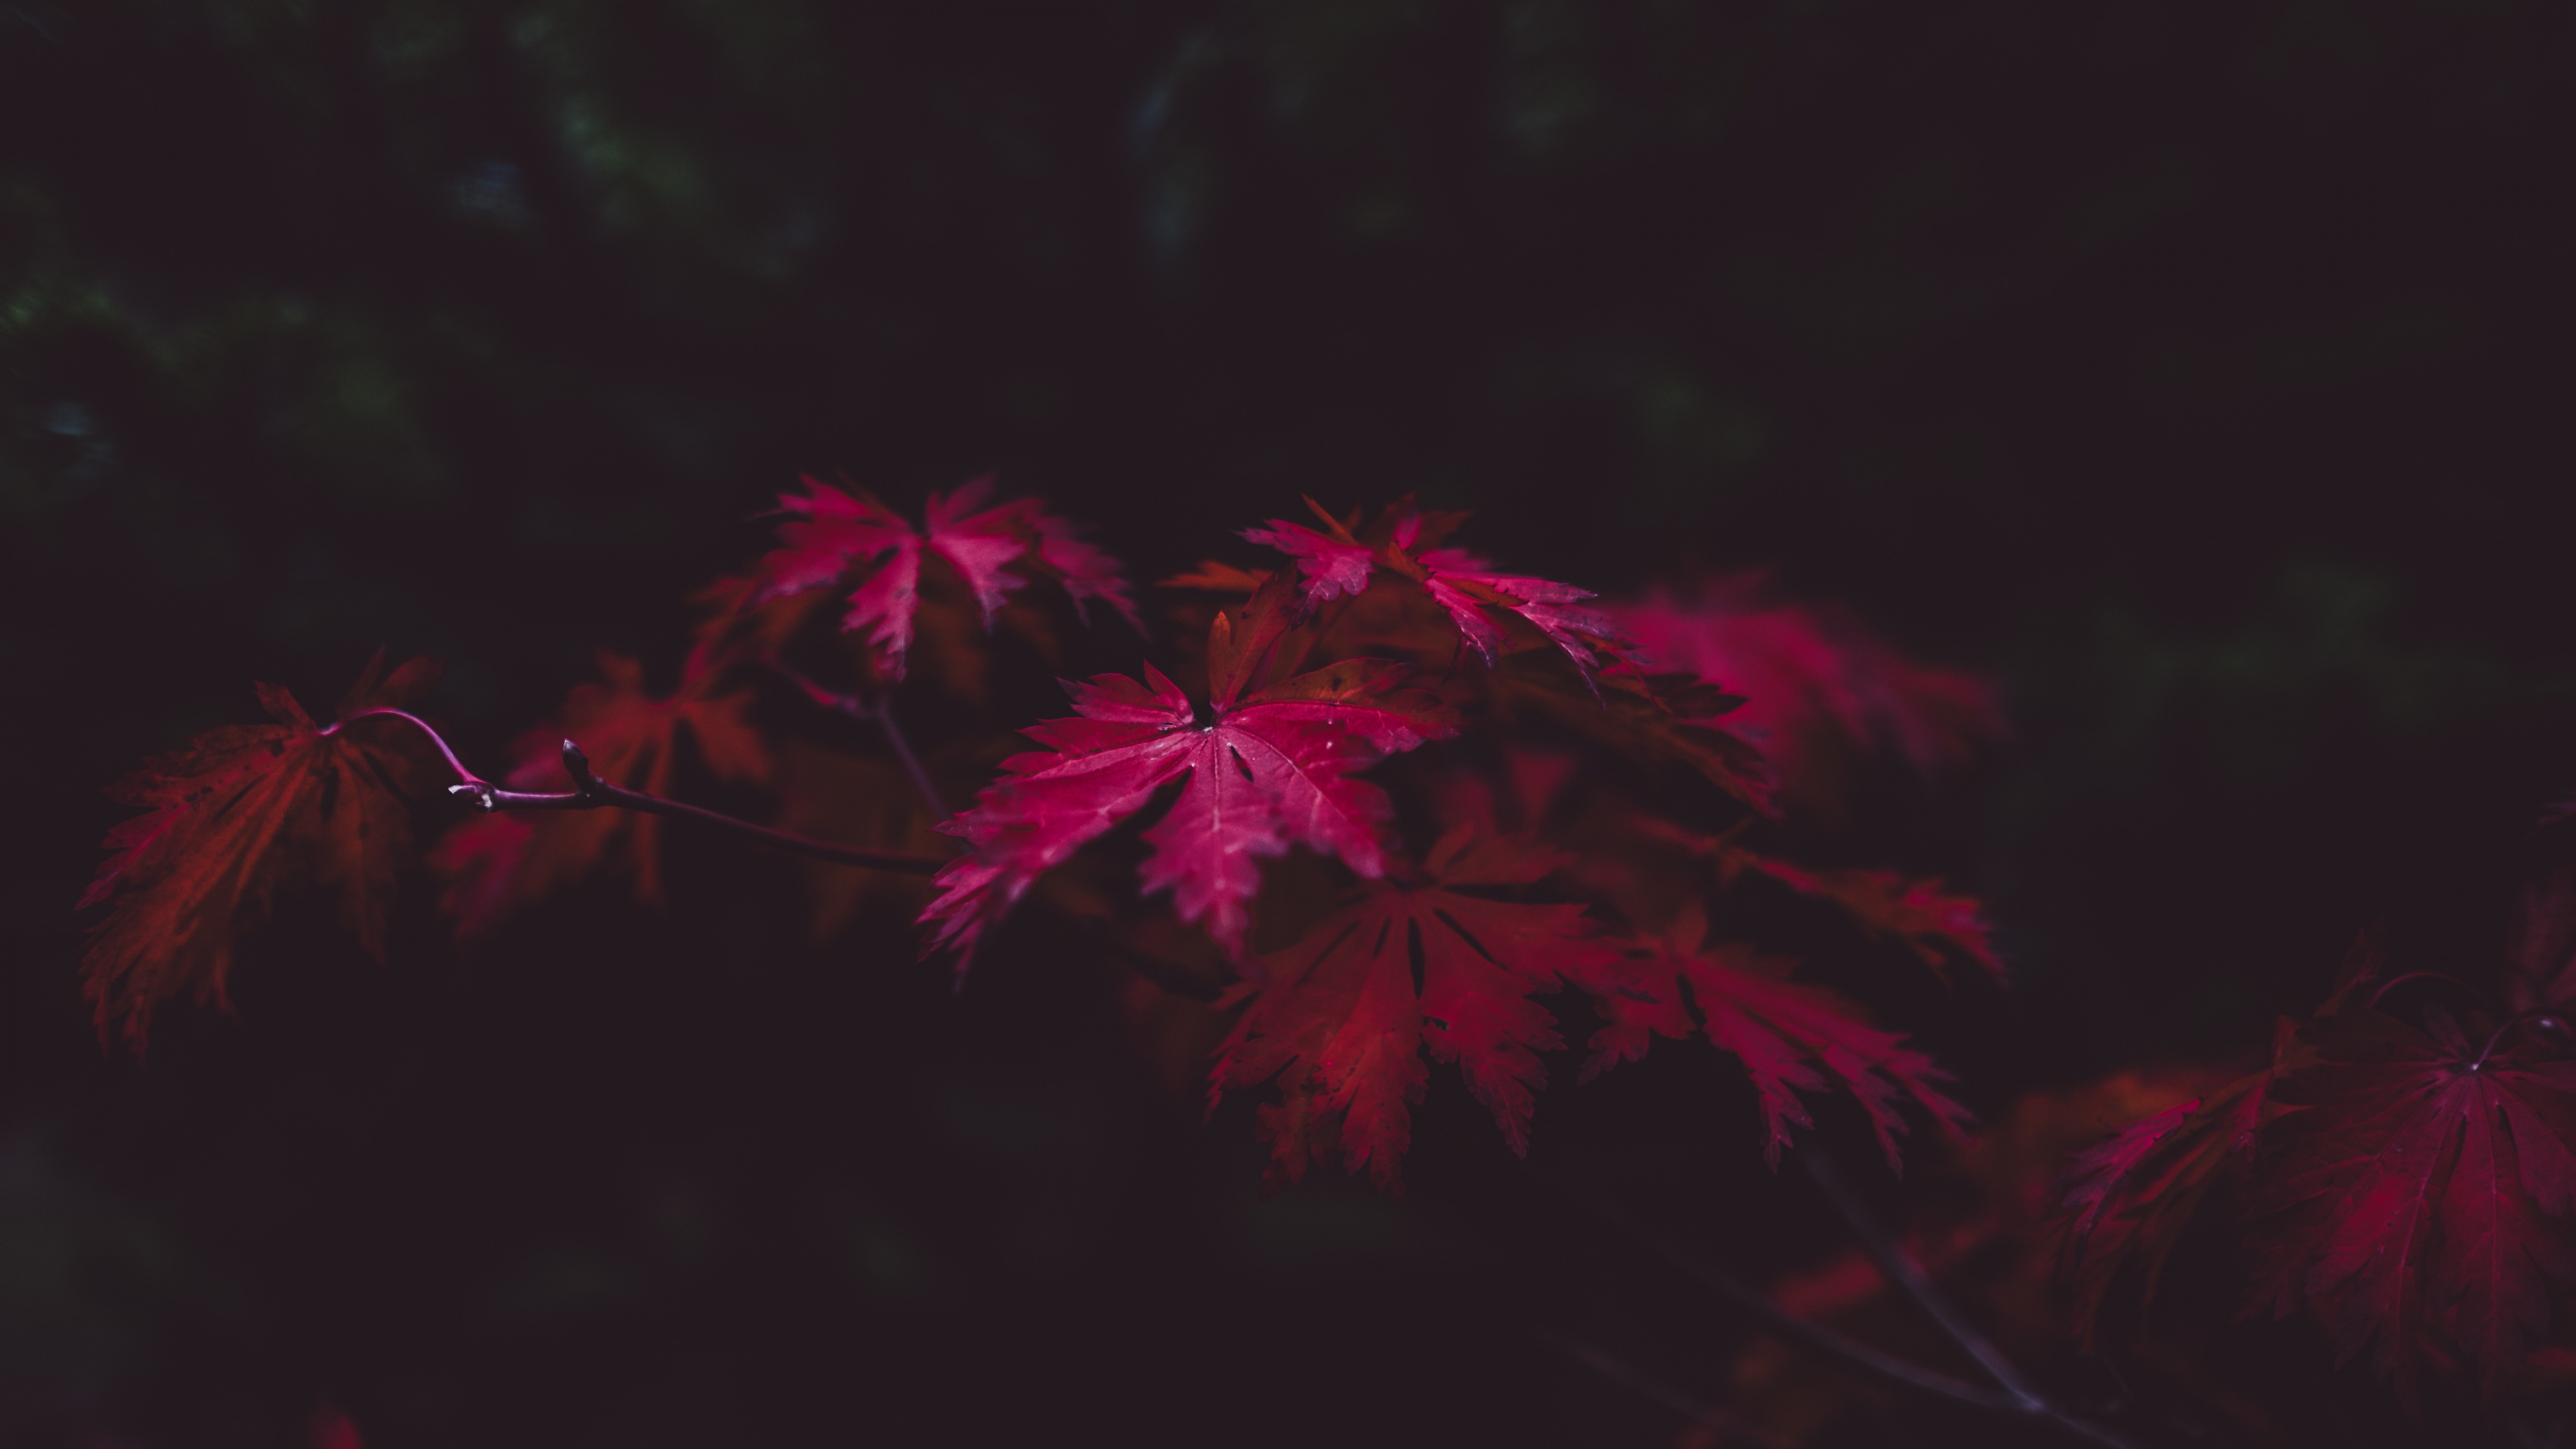 red leaves 4k 1540131926 - Red Leaves 4k - photography wallpapers, nature wallpapers, leaves wallpapers, 4k-wallpapers